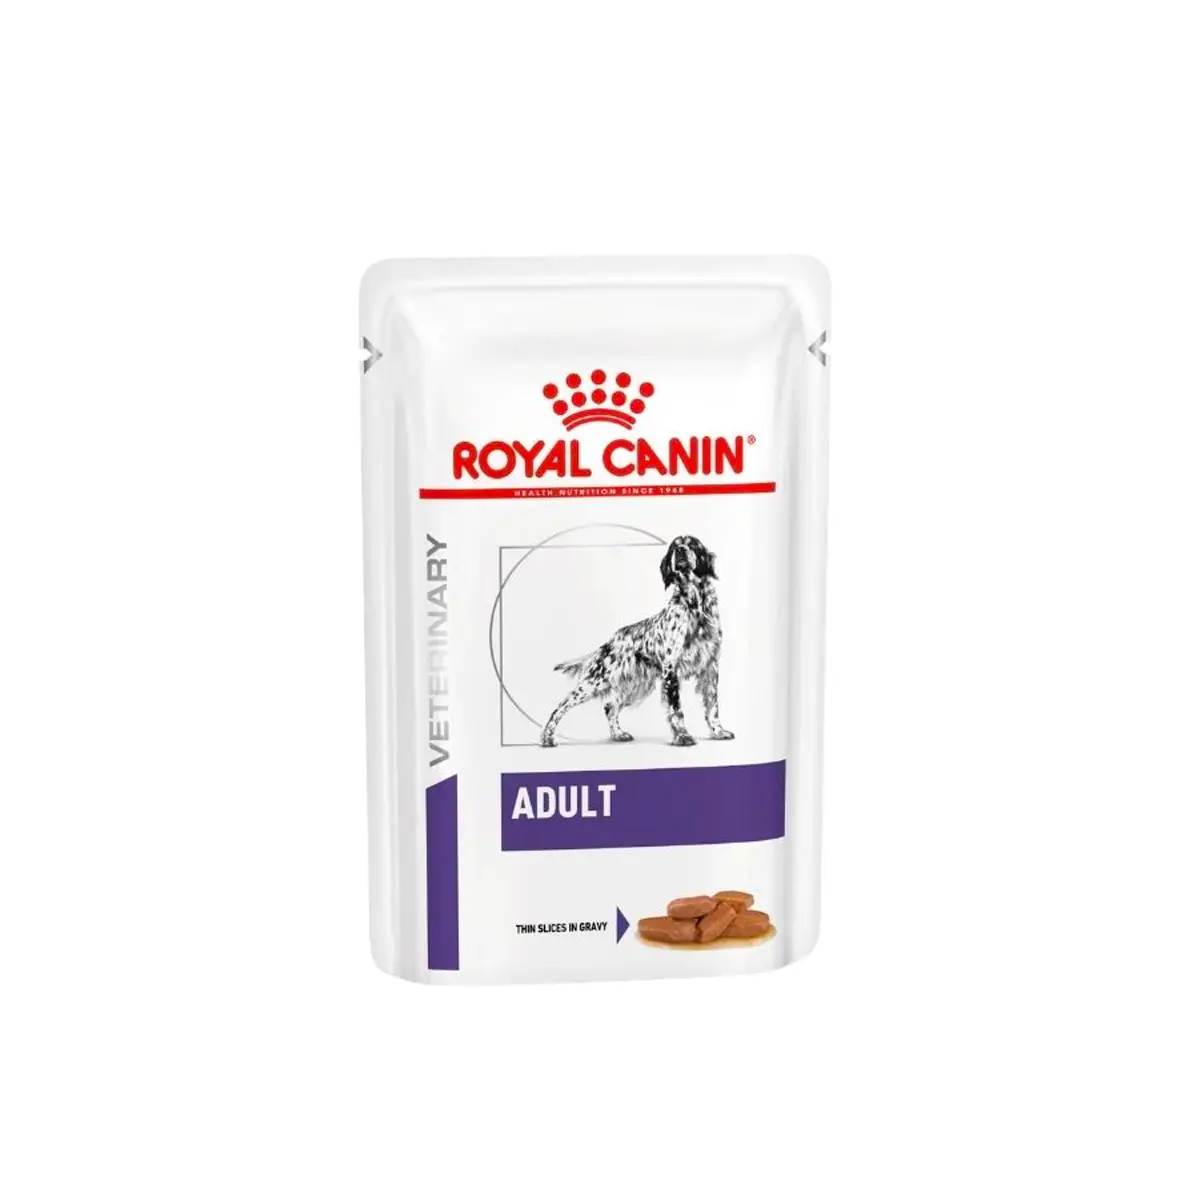 Royal Canin - Adult Dog Pouch 100g